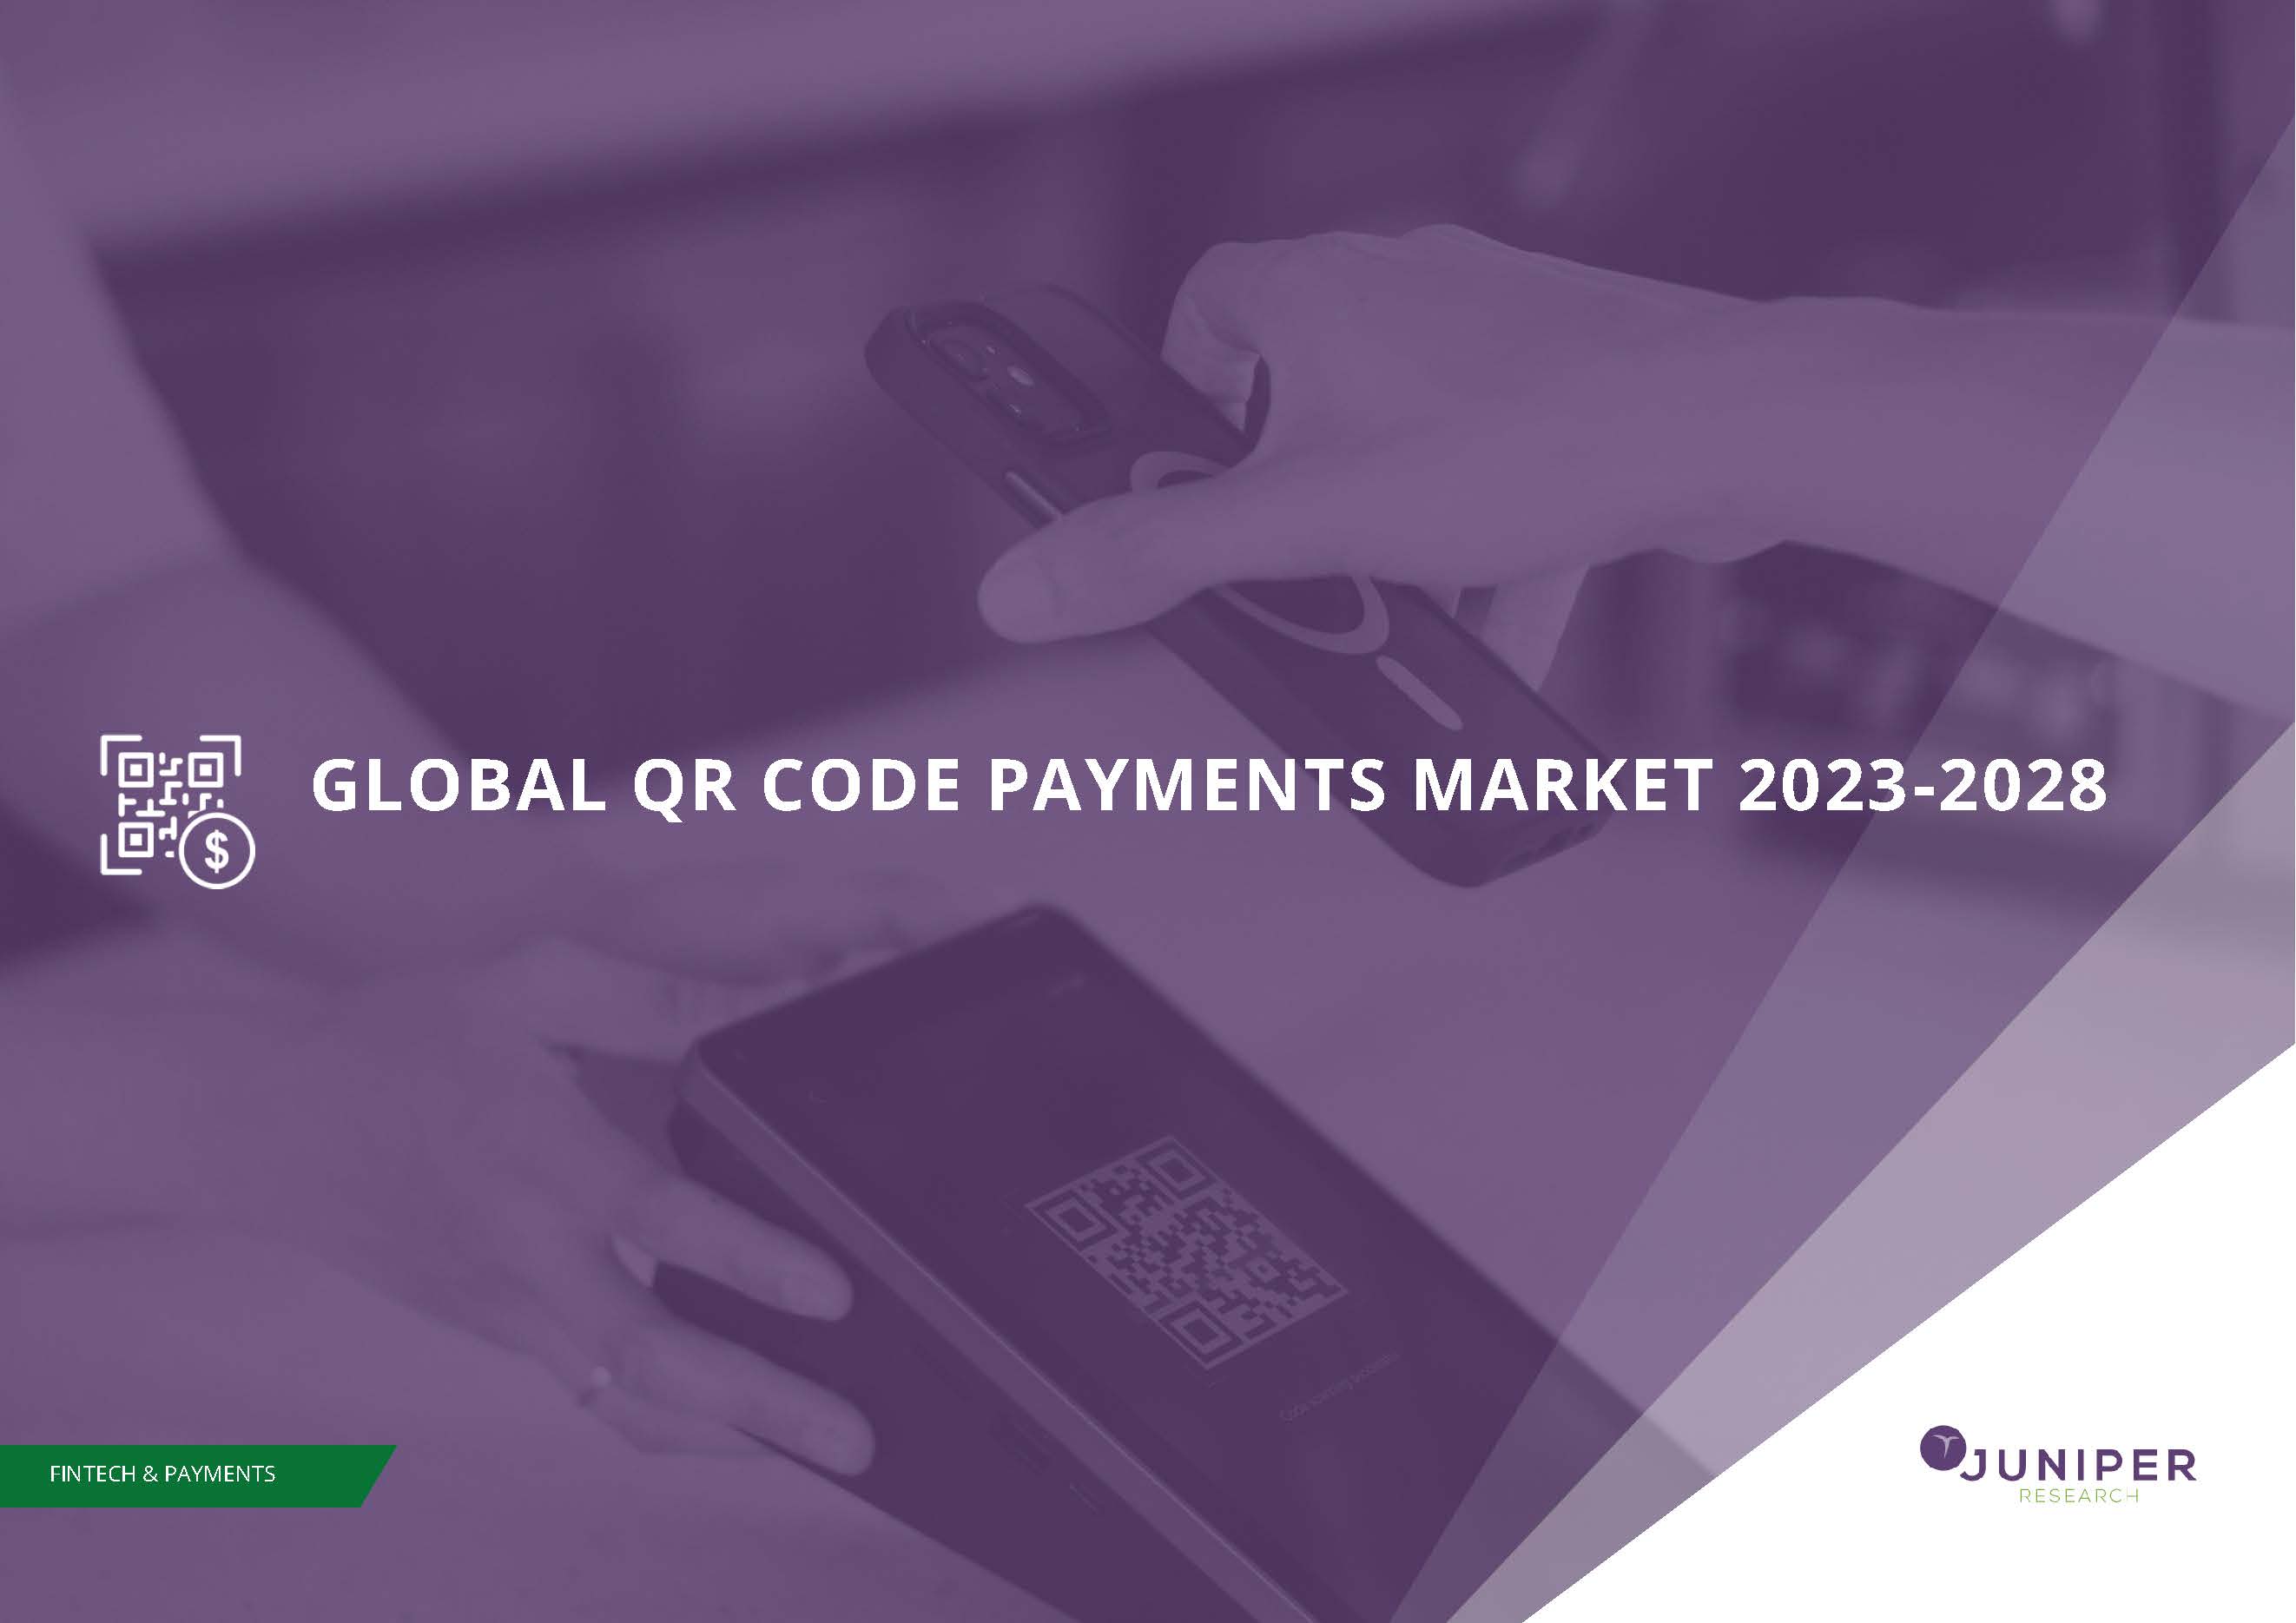 Press | $3 2025 Trillion to QR by Globally Payments Code Reach